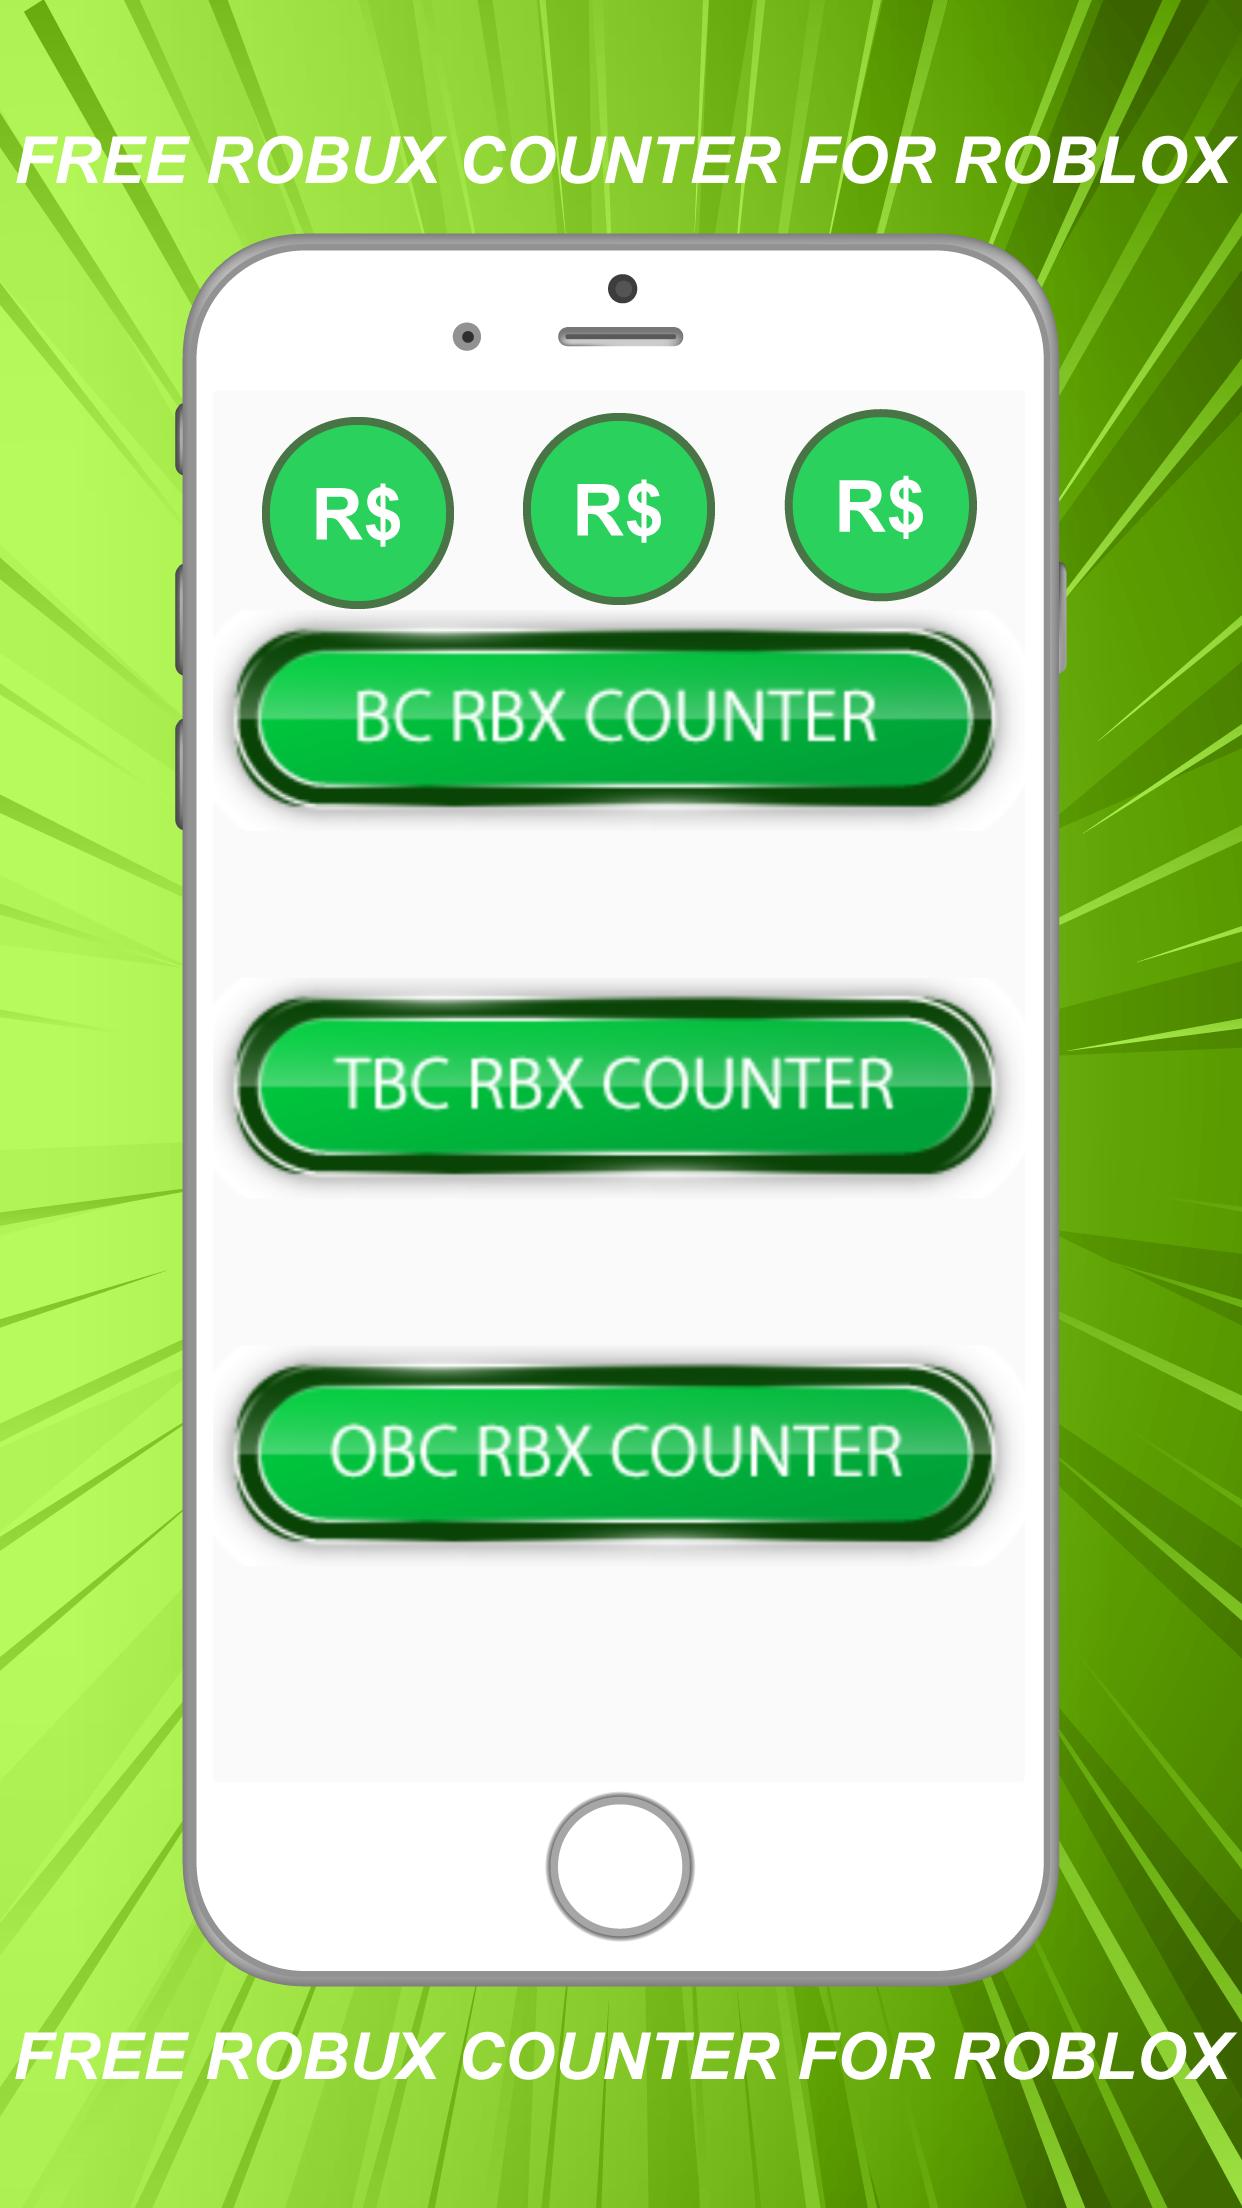 Free Robux Calc For Roblox 2020 For Android Apk Download - kostenloser robux calc für roblox 2020 für android apk